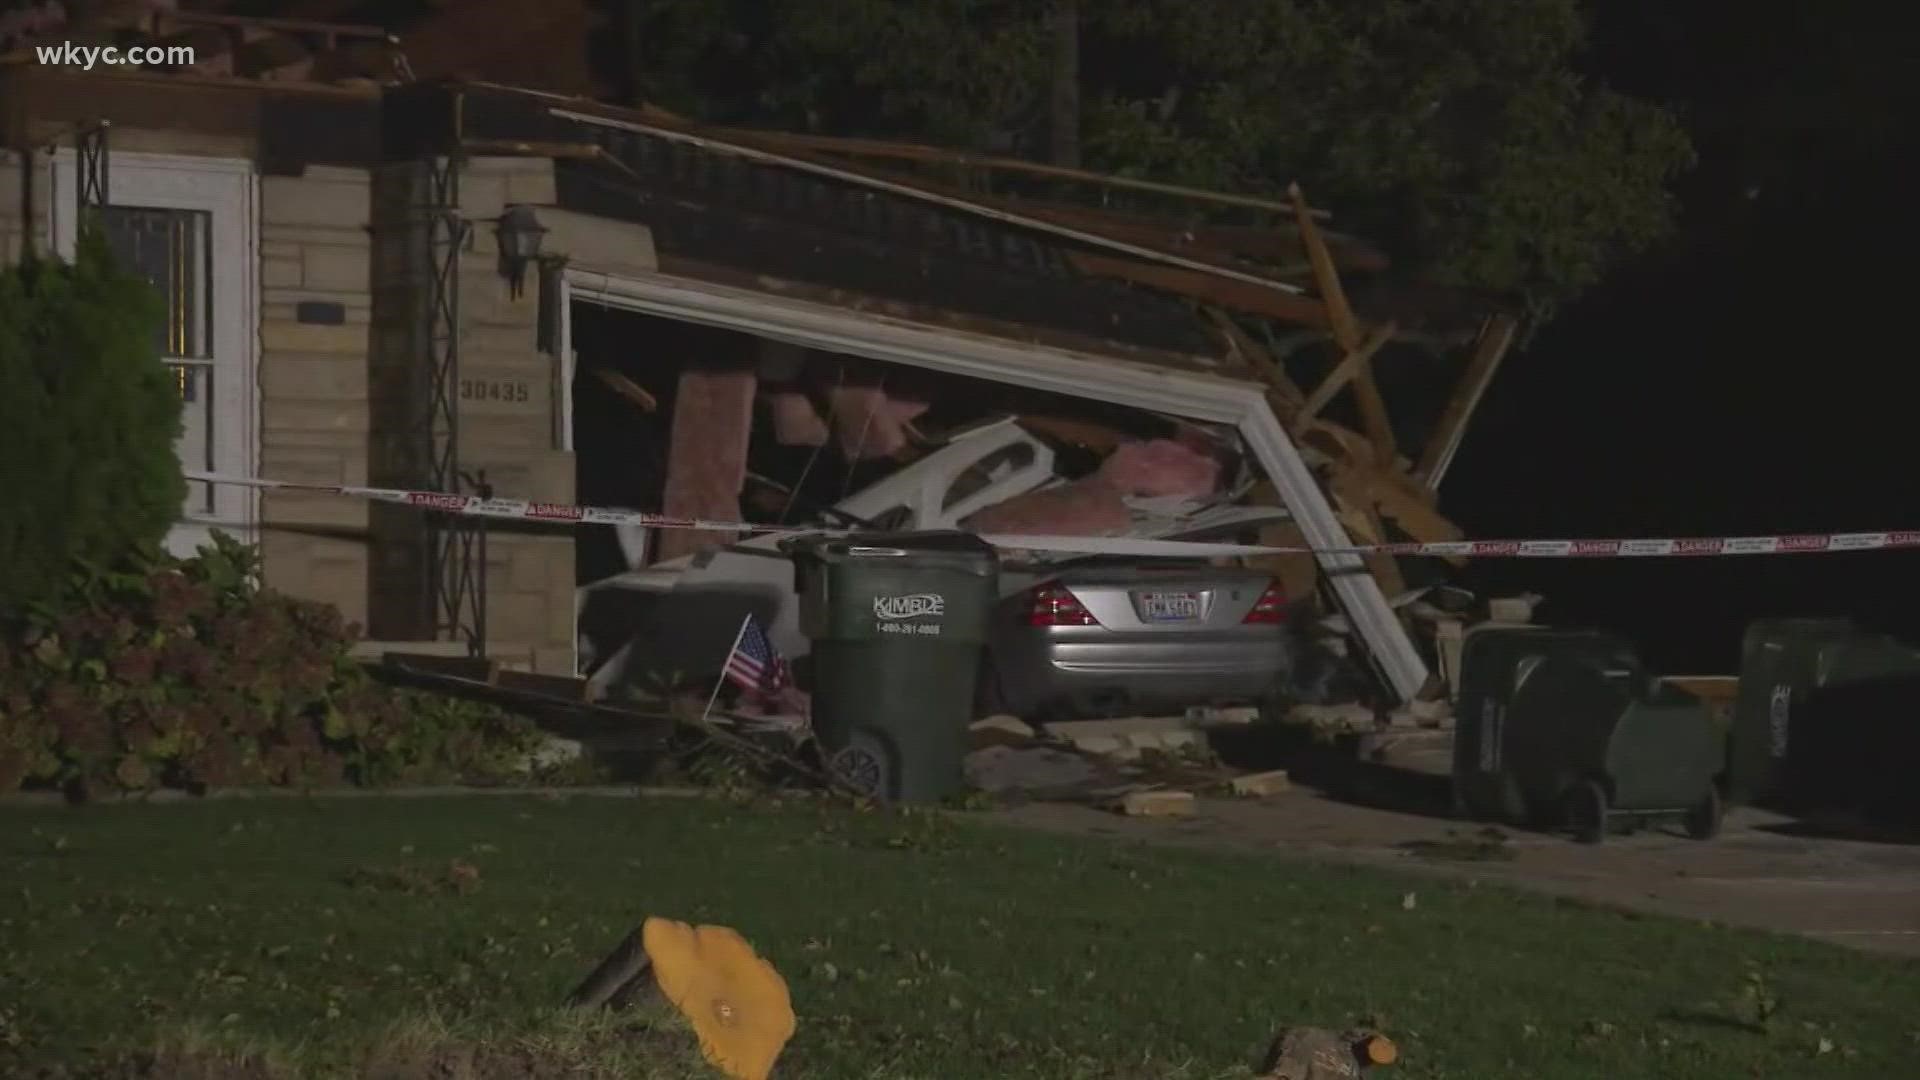 Severe weather across Northeast Ohio left one Wickliffe homeowner without a home Thursday evening after what is believed to have been a possible tornado.